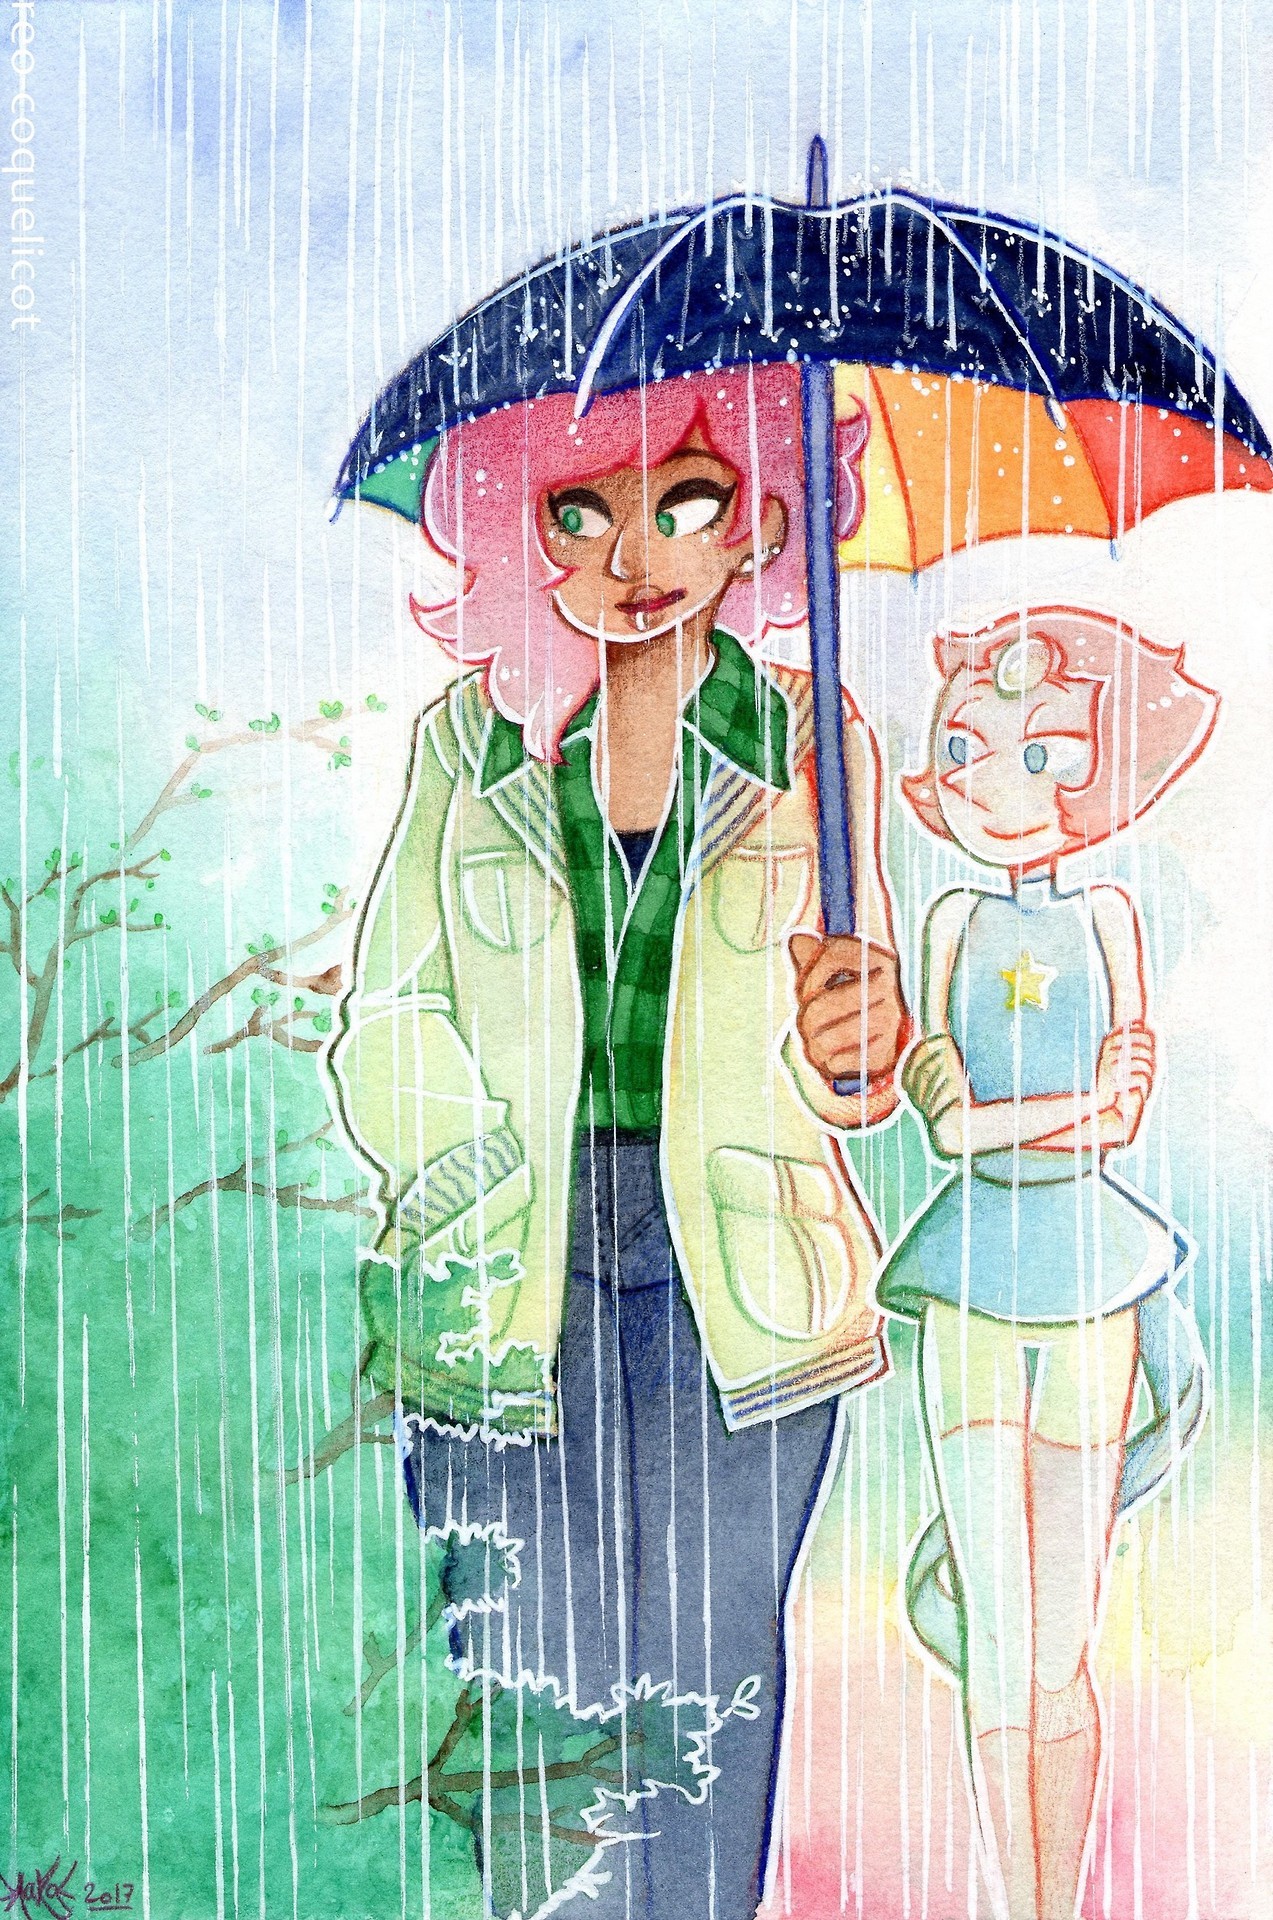 reo-coquelicot: Spring ~ I swear I’m never drawing umbrellas again. (Says the girl